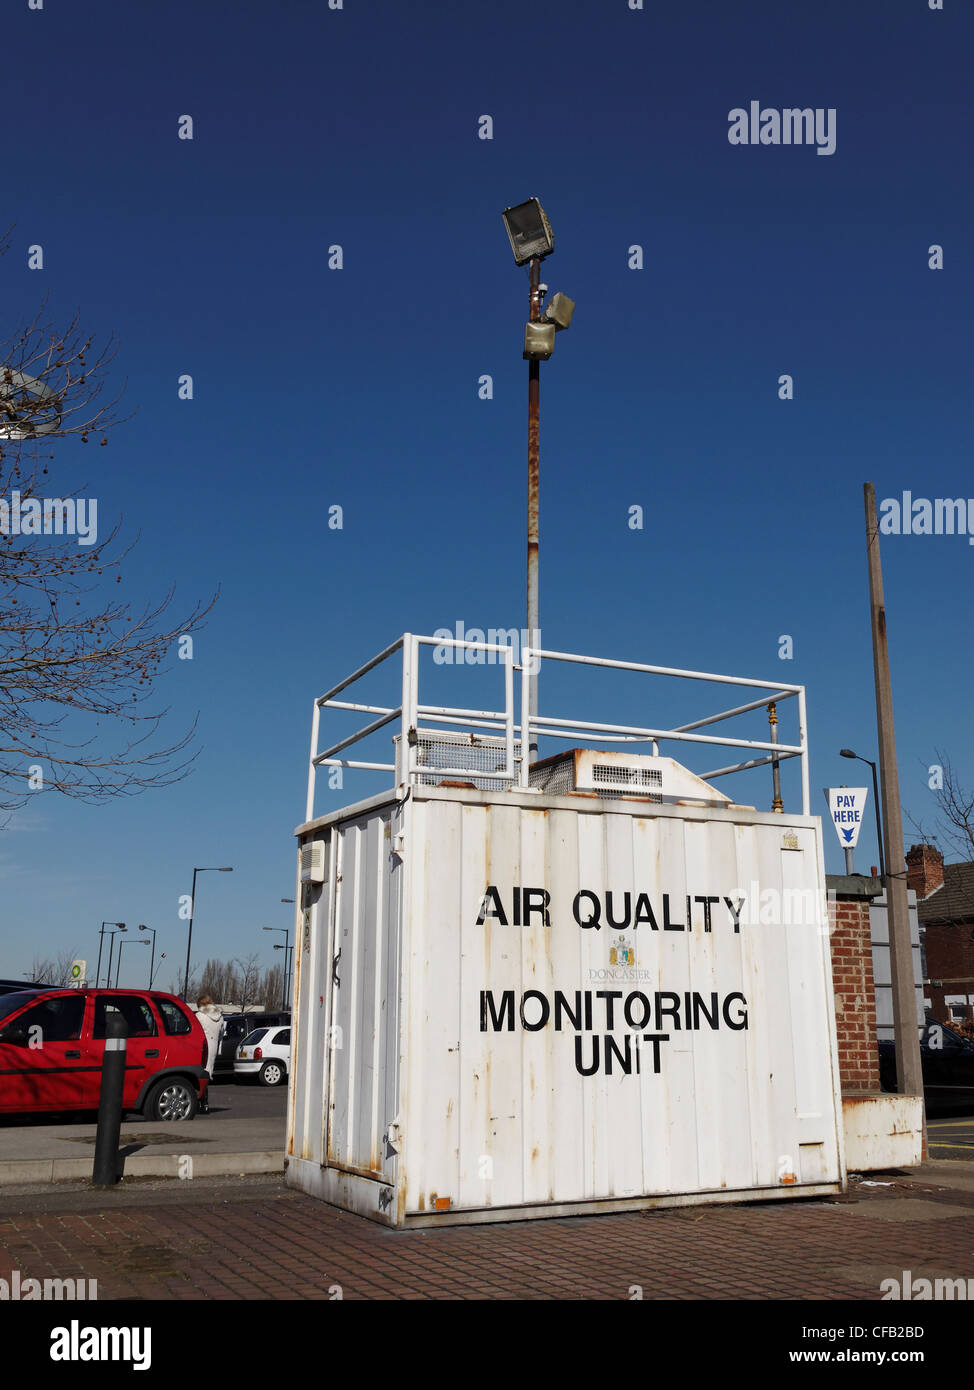 An air quality monitoring unit, Doncaster, South Yorkshire, England. Stock Photo